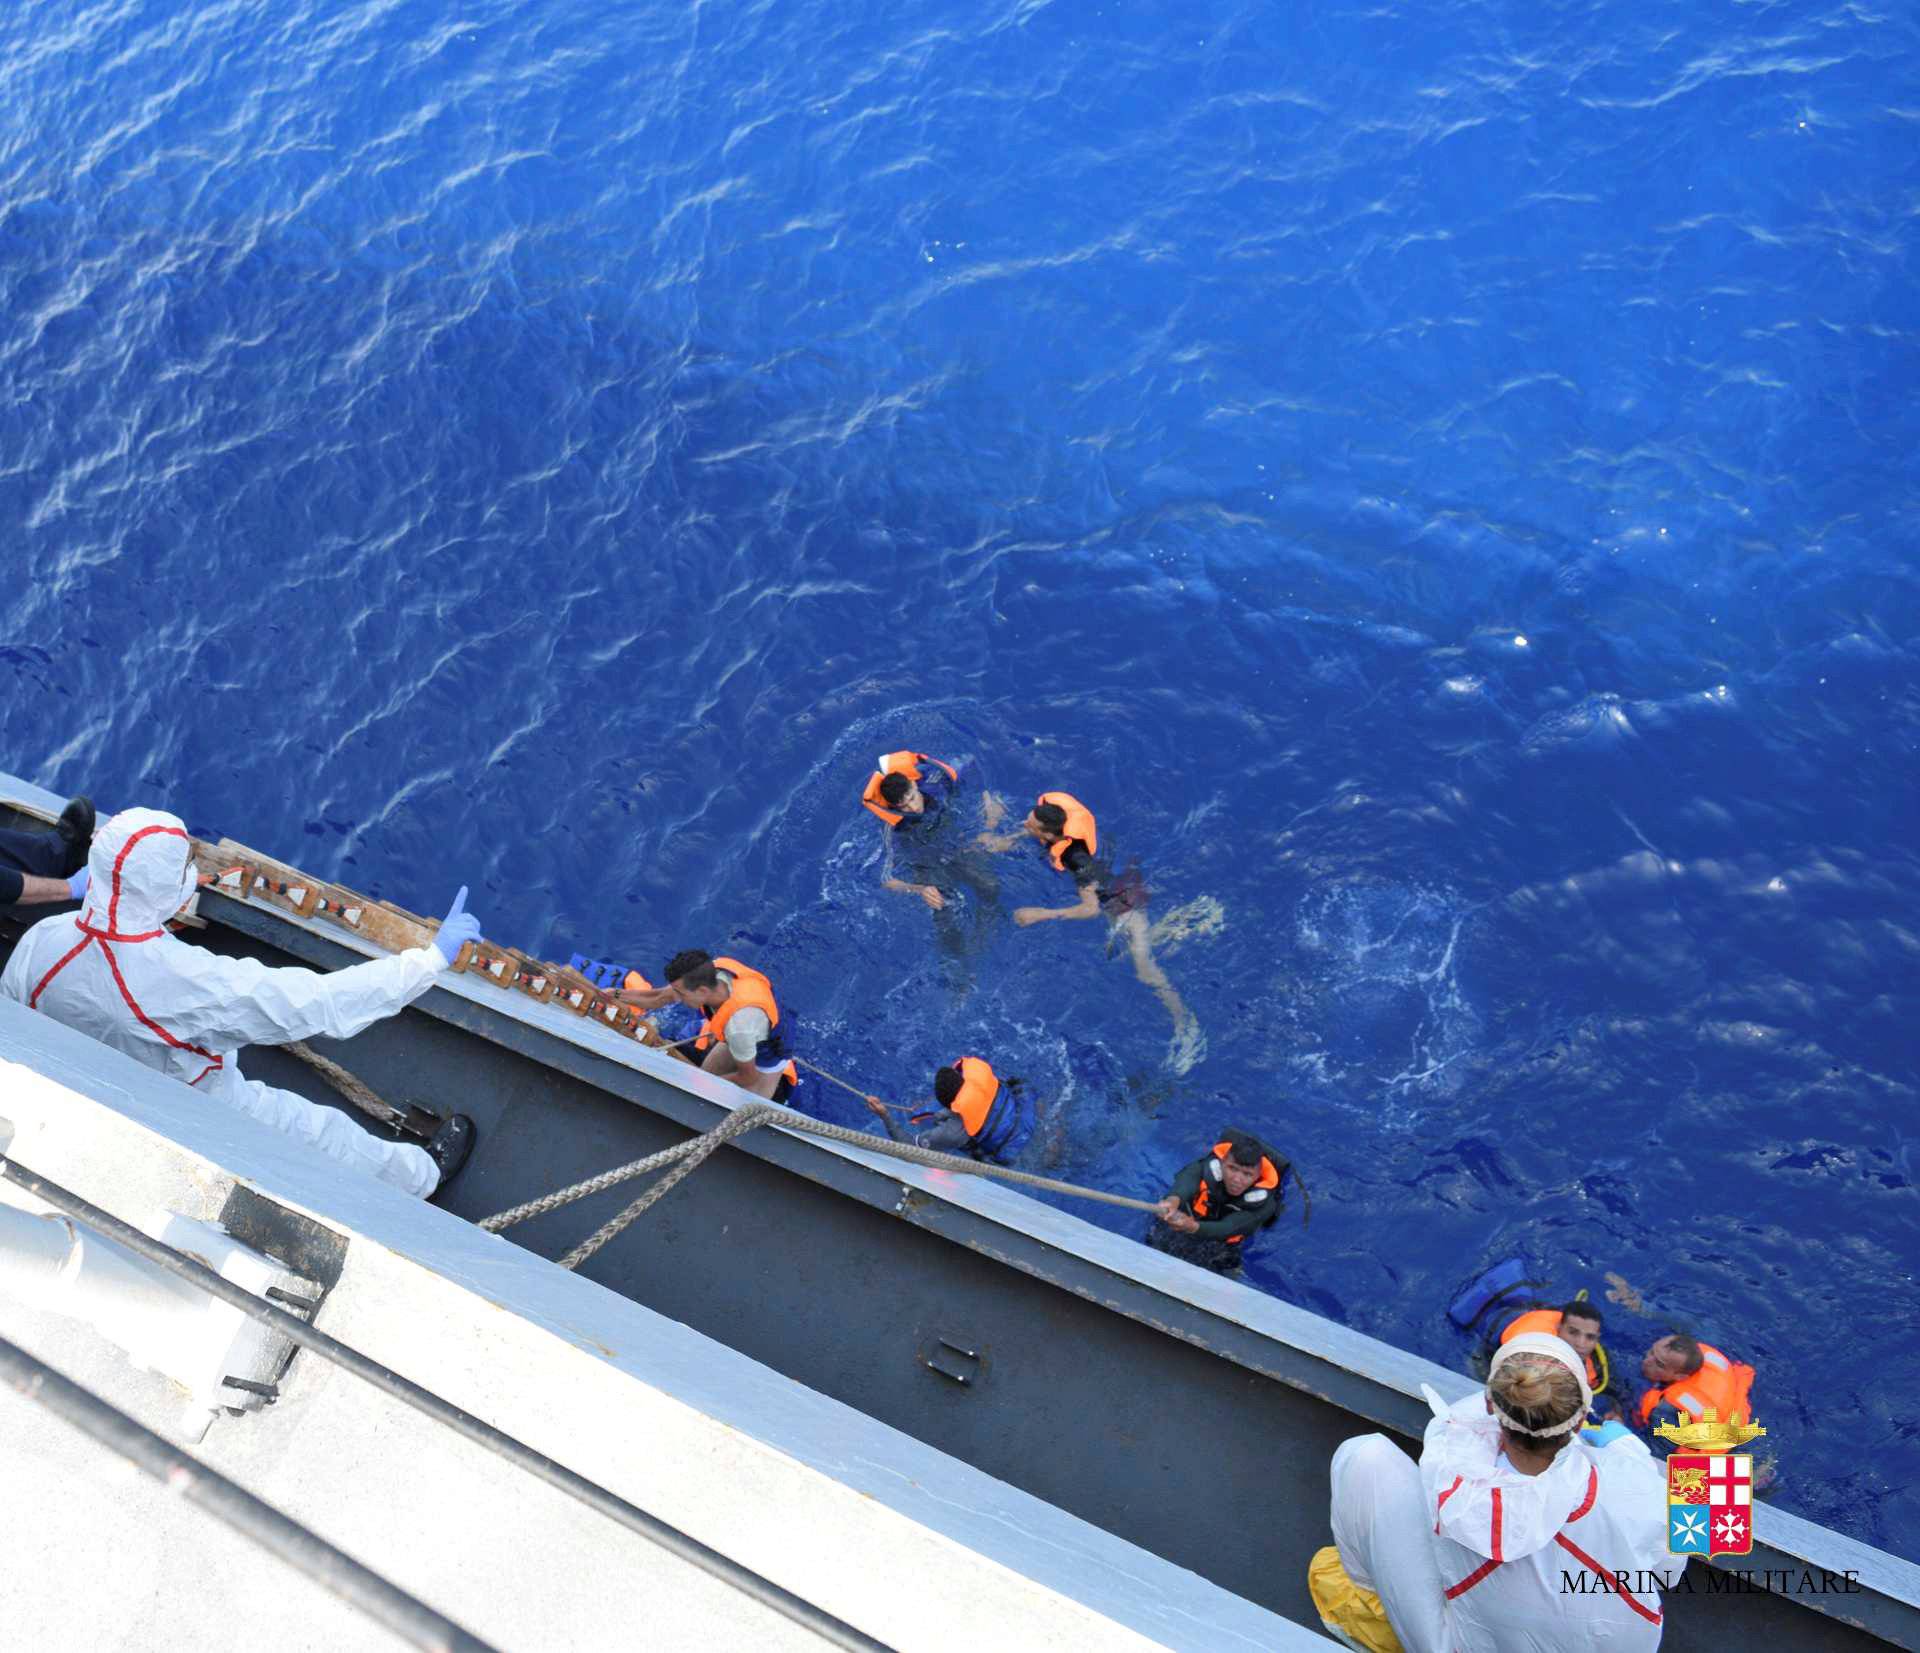 Migrants from a capsized boat are rescued during a rescue operation by Italian navy ships "Bettica" and "Bergamini" off the coast of Libya